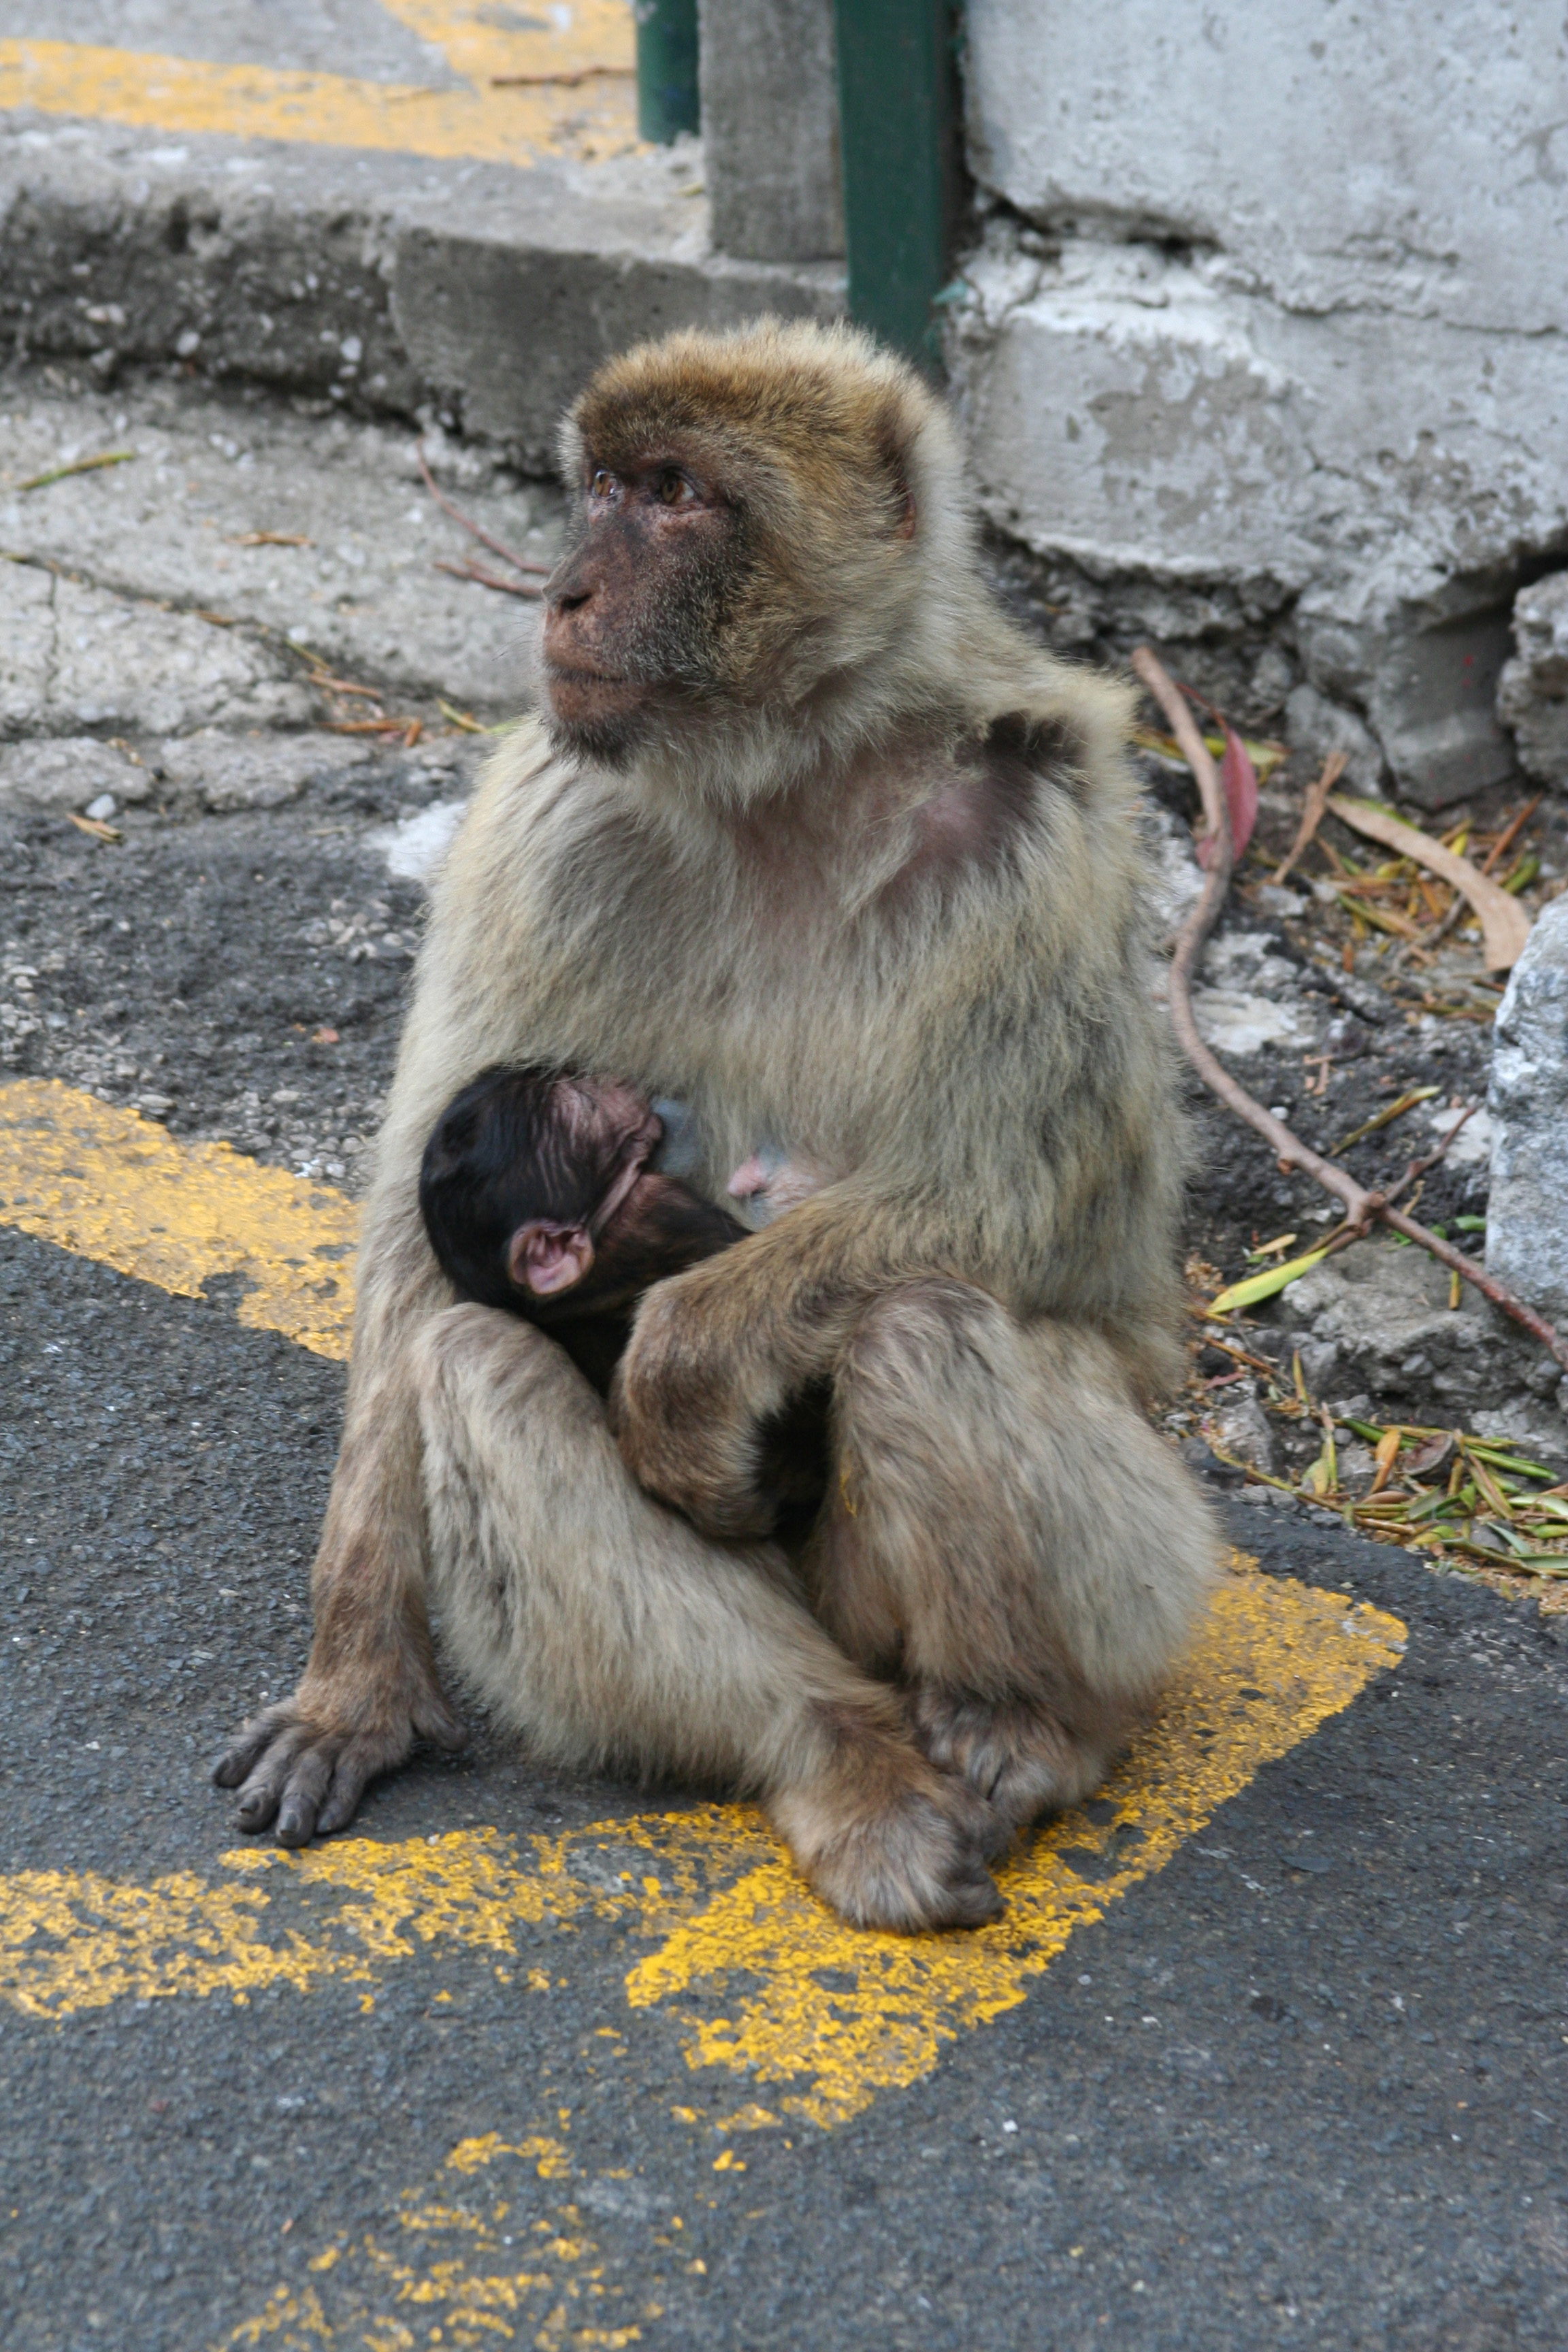 mother & child